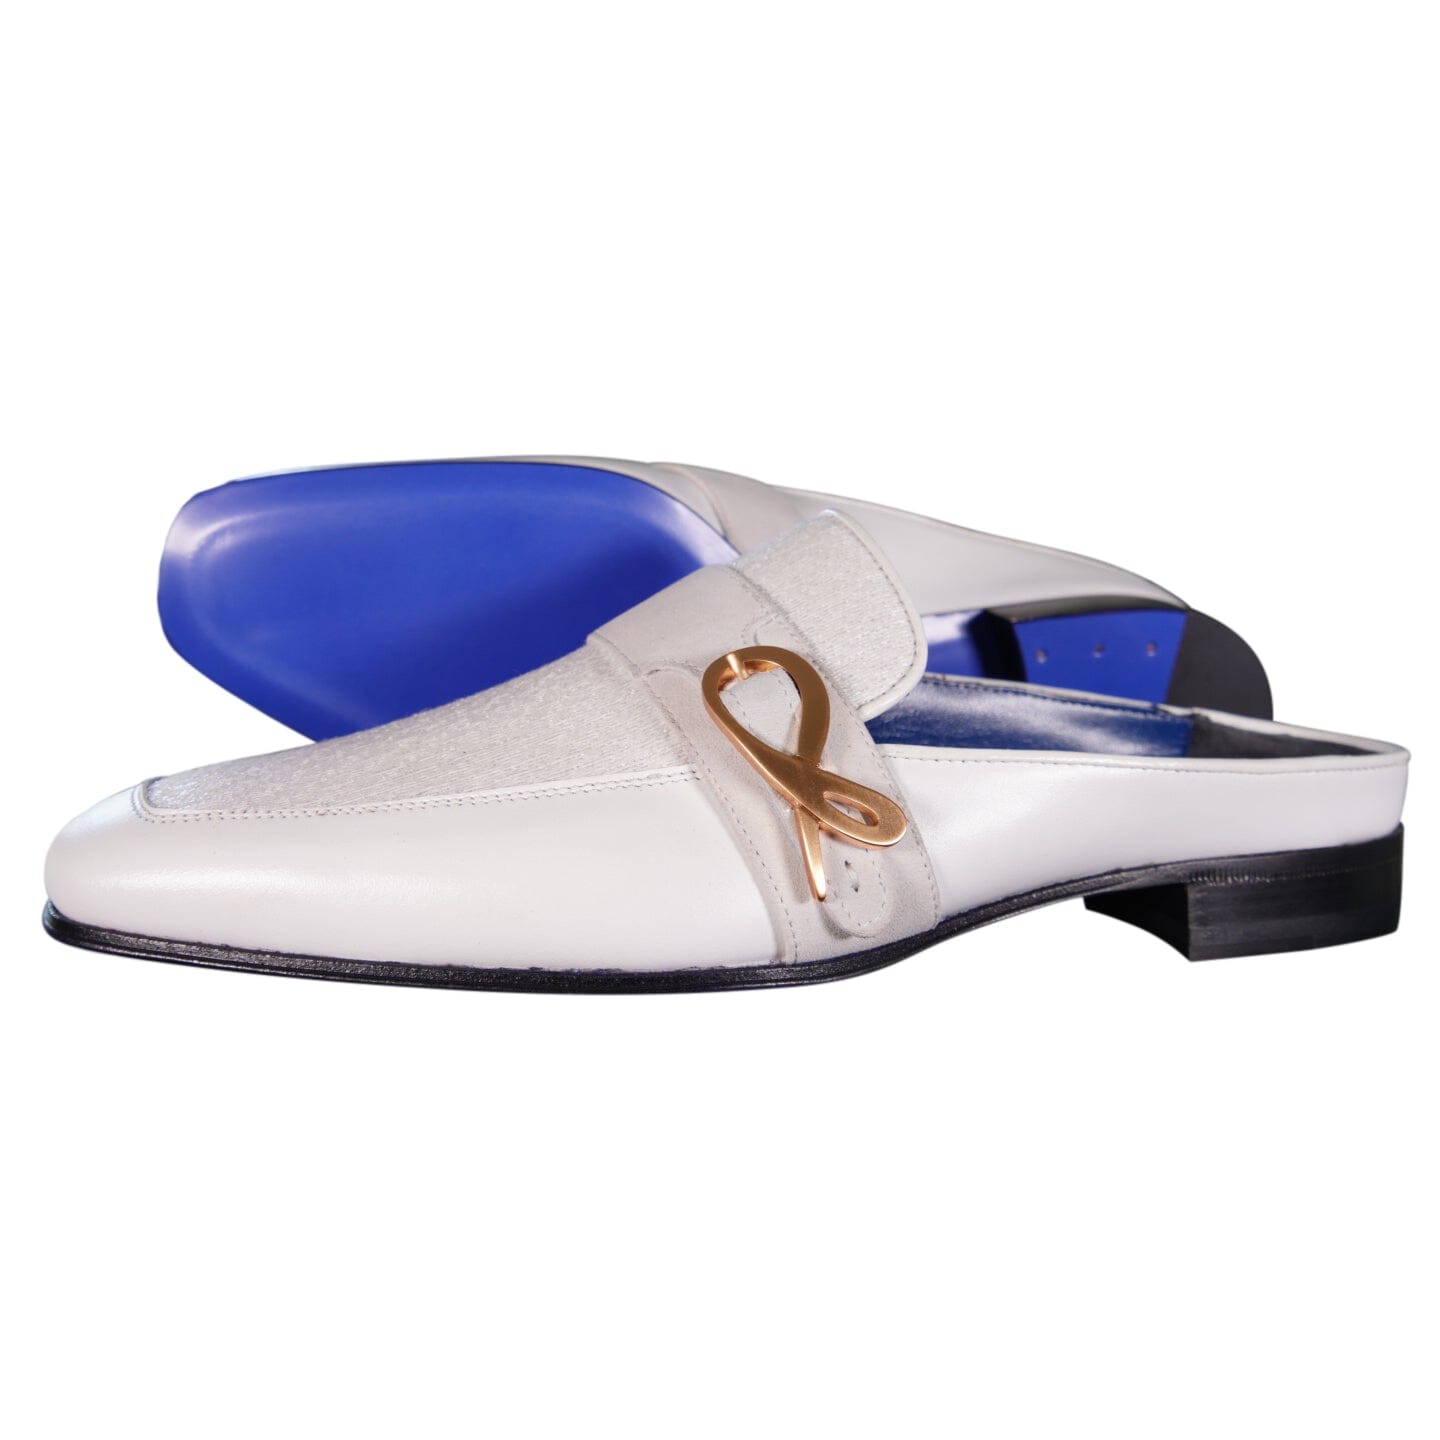 White Diamante With Rose Gold Hardware Leather Slippers